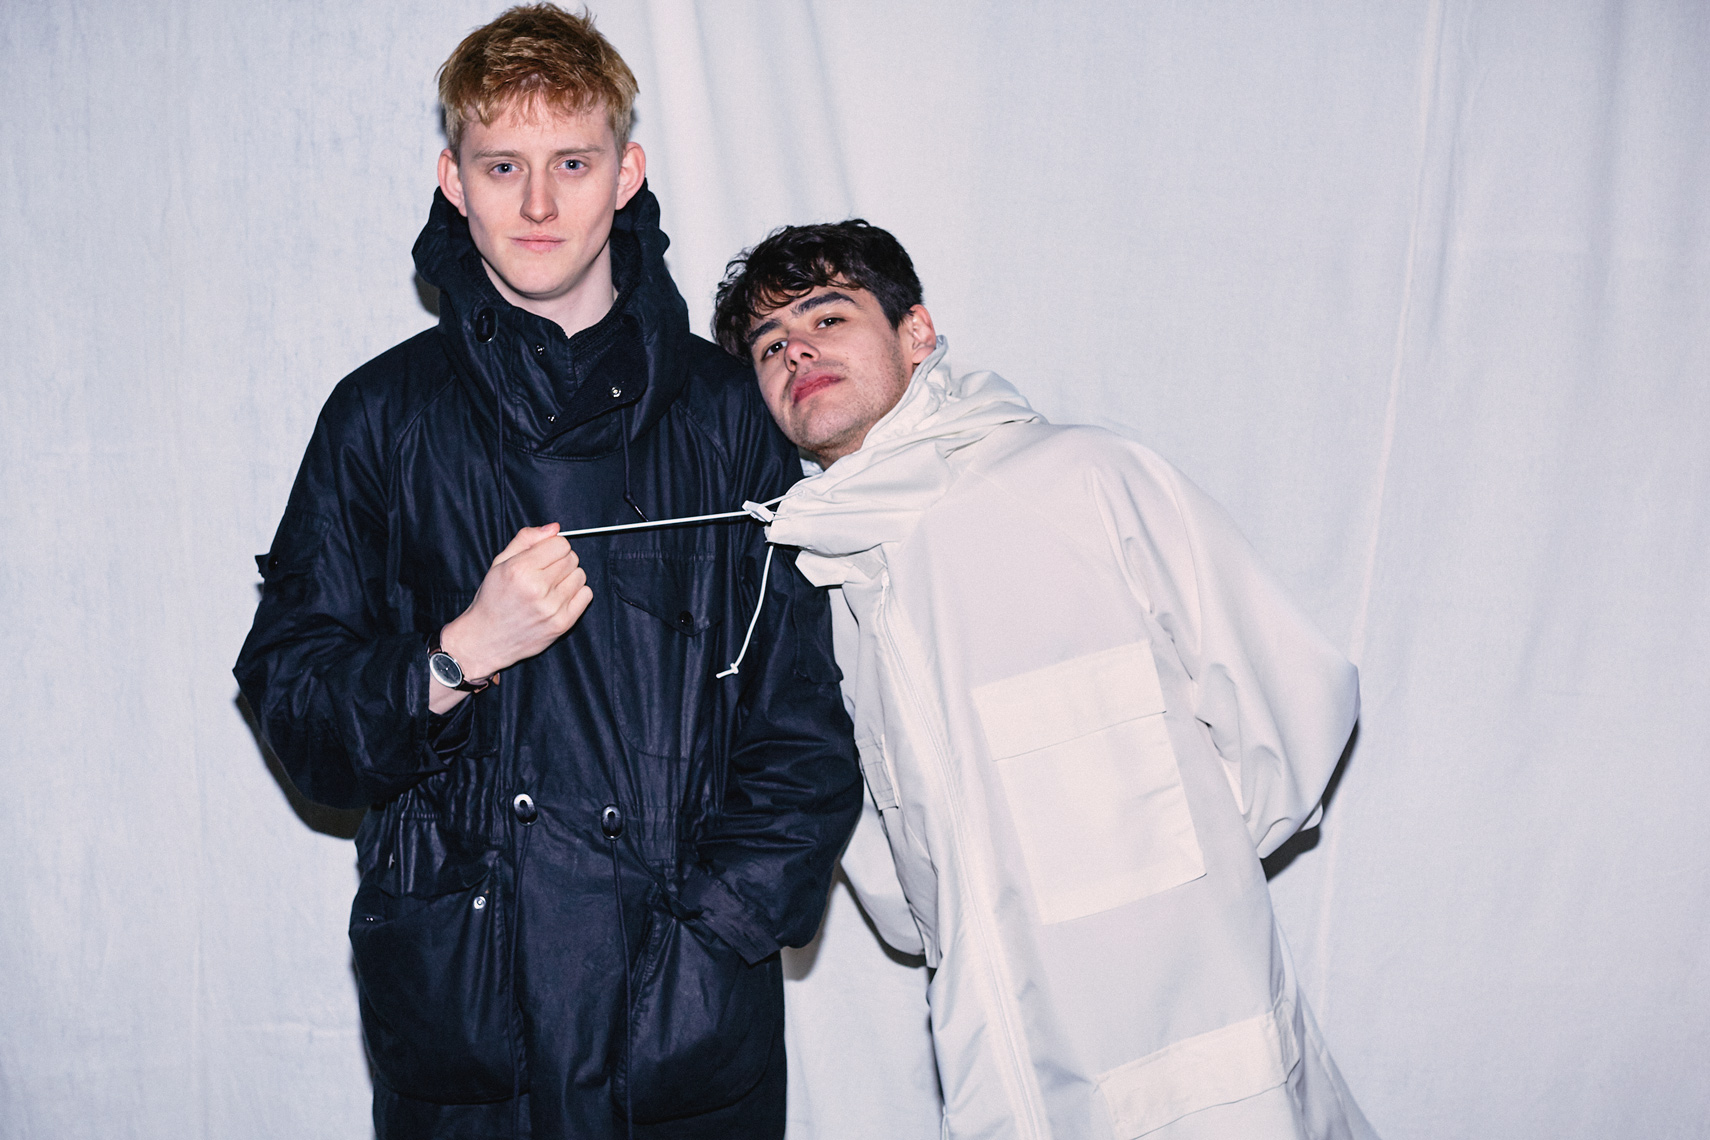 Lorn Macdonald and Cristian Ortega by Tom Oxley